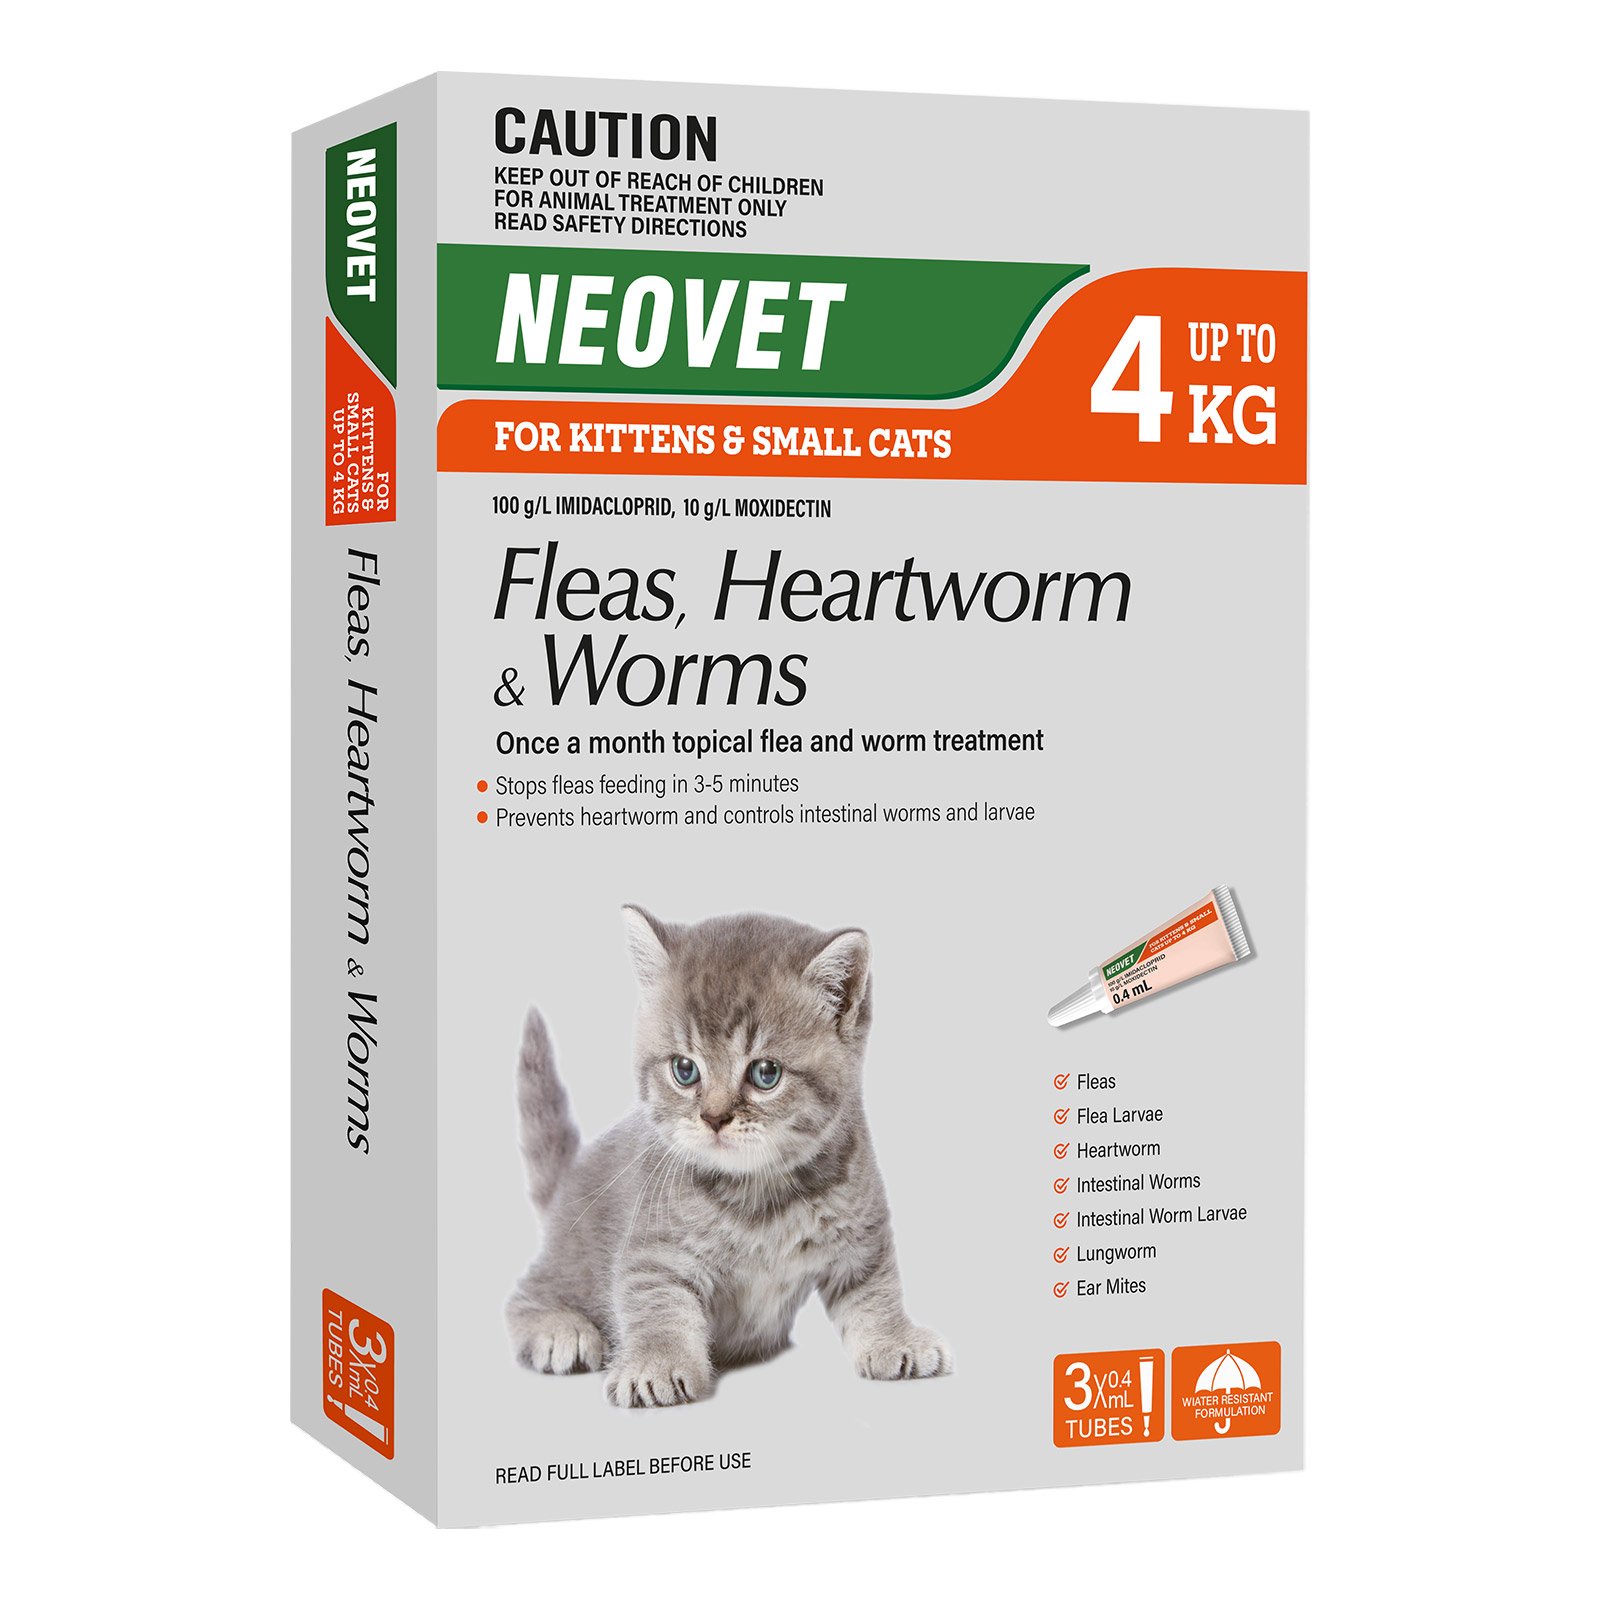 Neovet Flea and Worming For Kittens and Small Cats Upto 4kg Orange